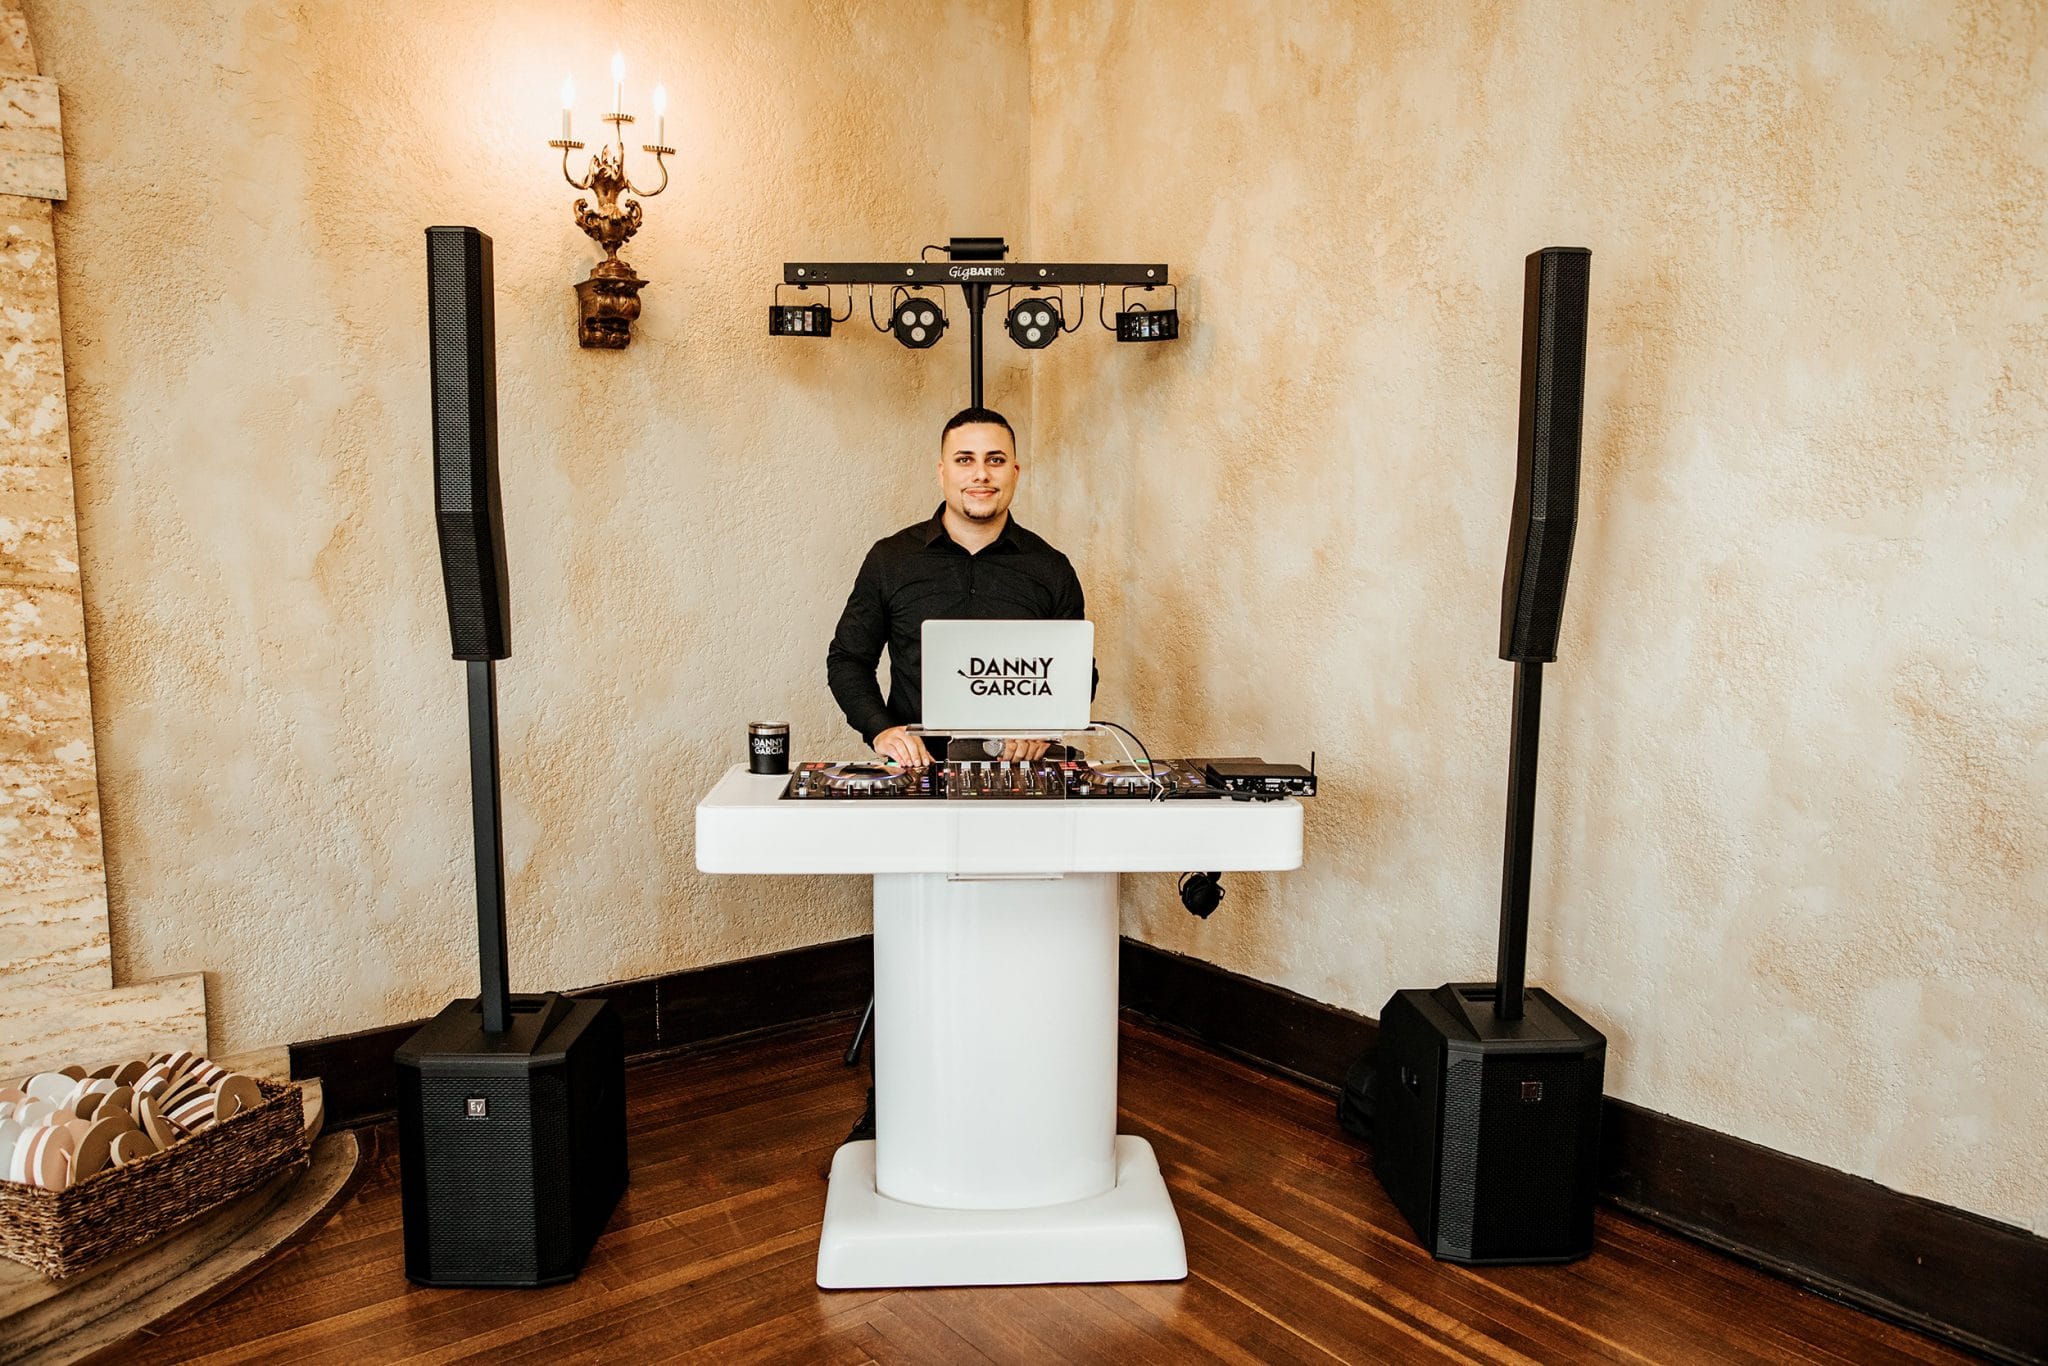 dj stands behind simple white dj booth stand with speakers on both sides and lights on a stand behind him in the corner of a room